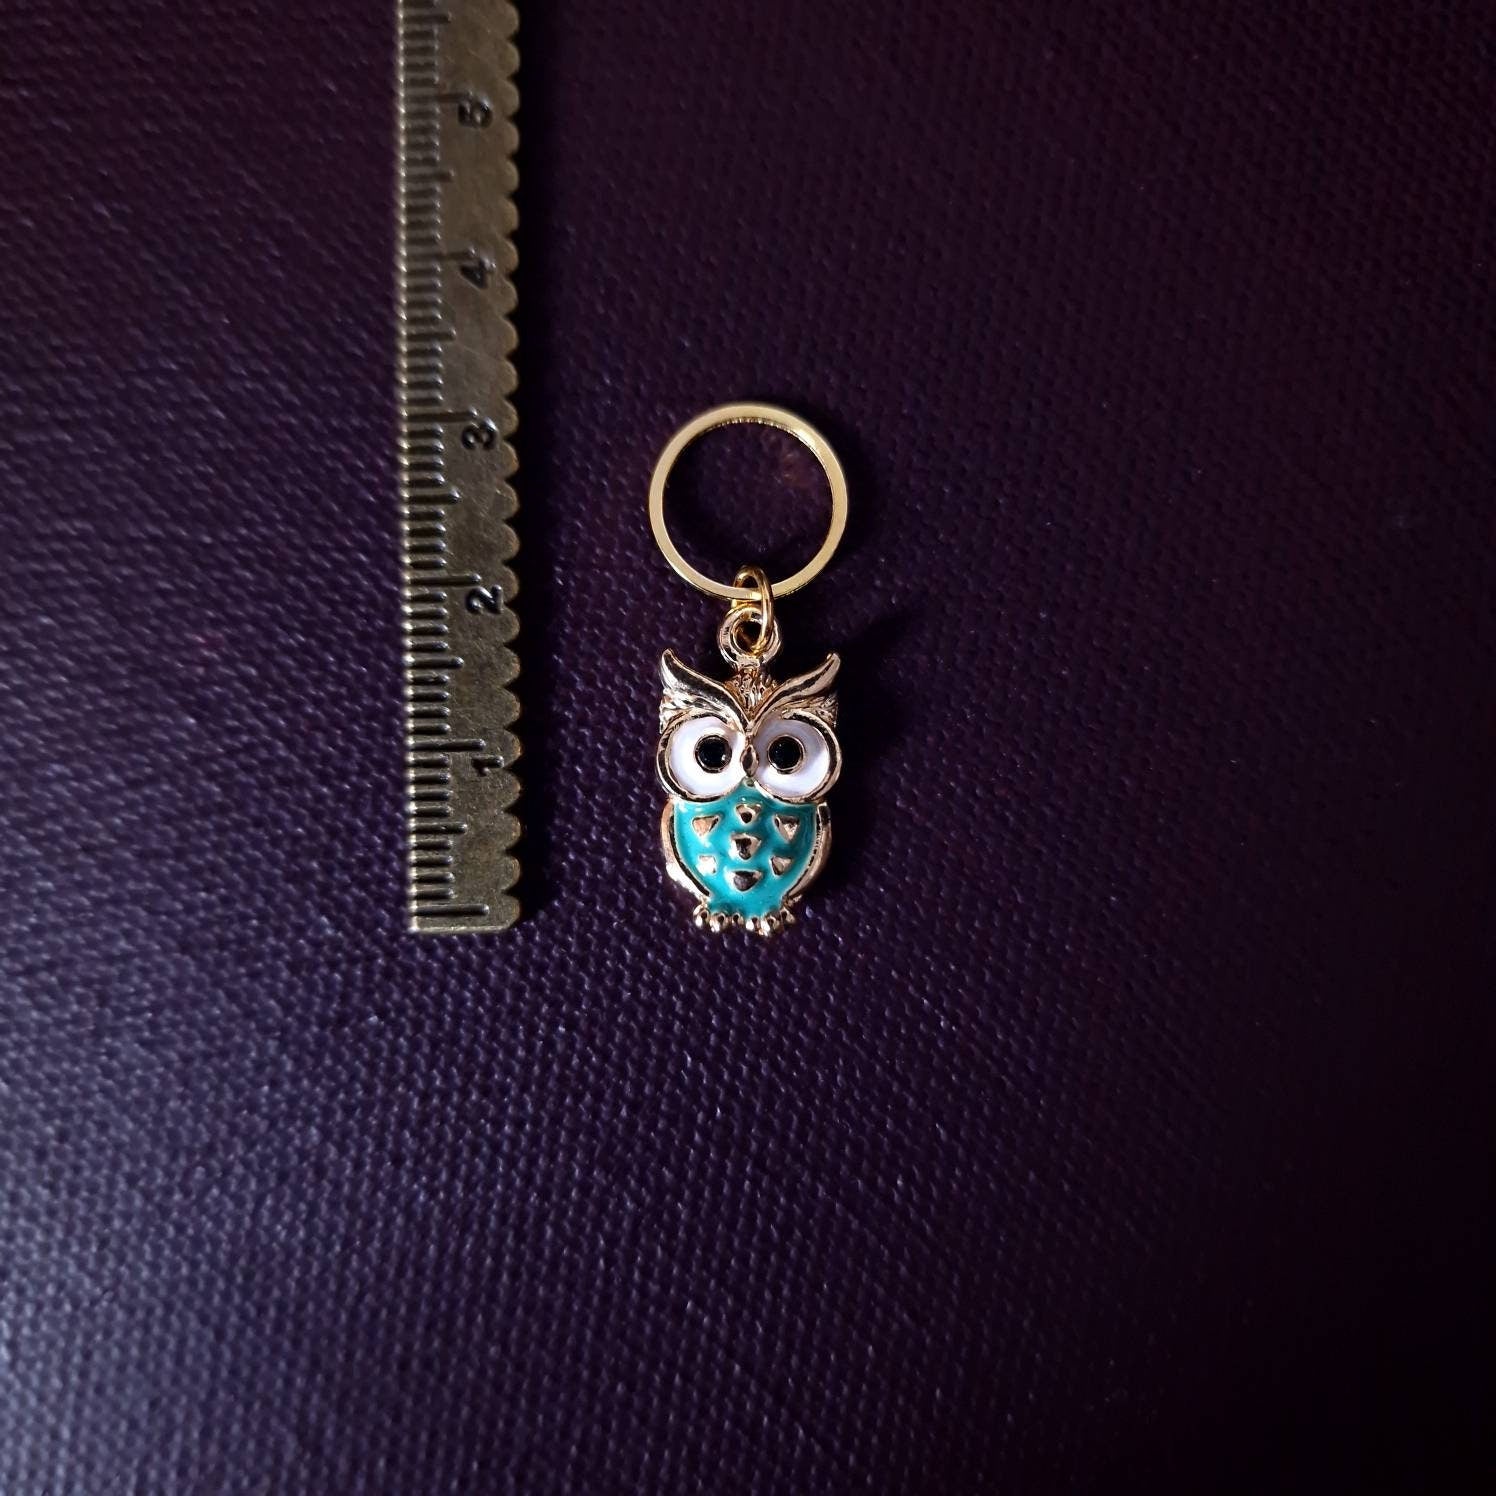 Stitch marker ~ Owl ~ Knitting notions, progress markers, progress keepers, crochet notions, gift for knitter